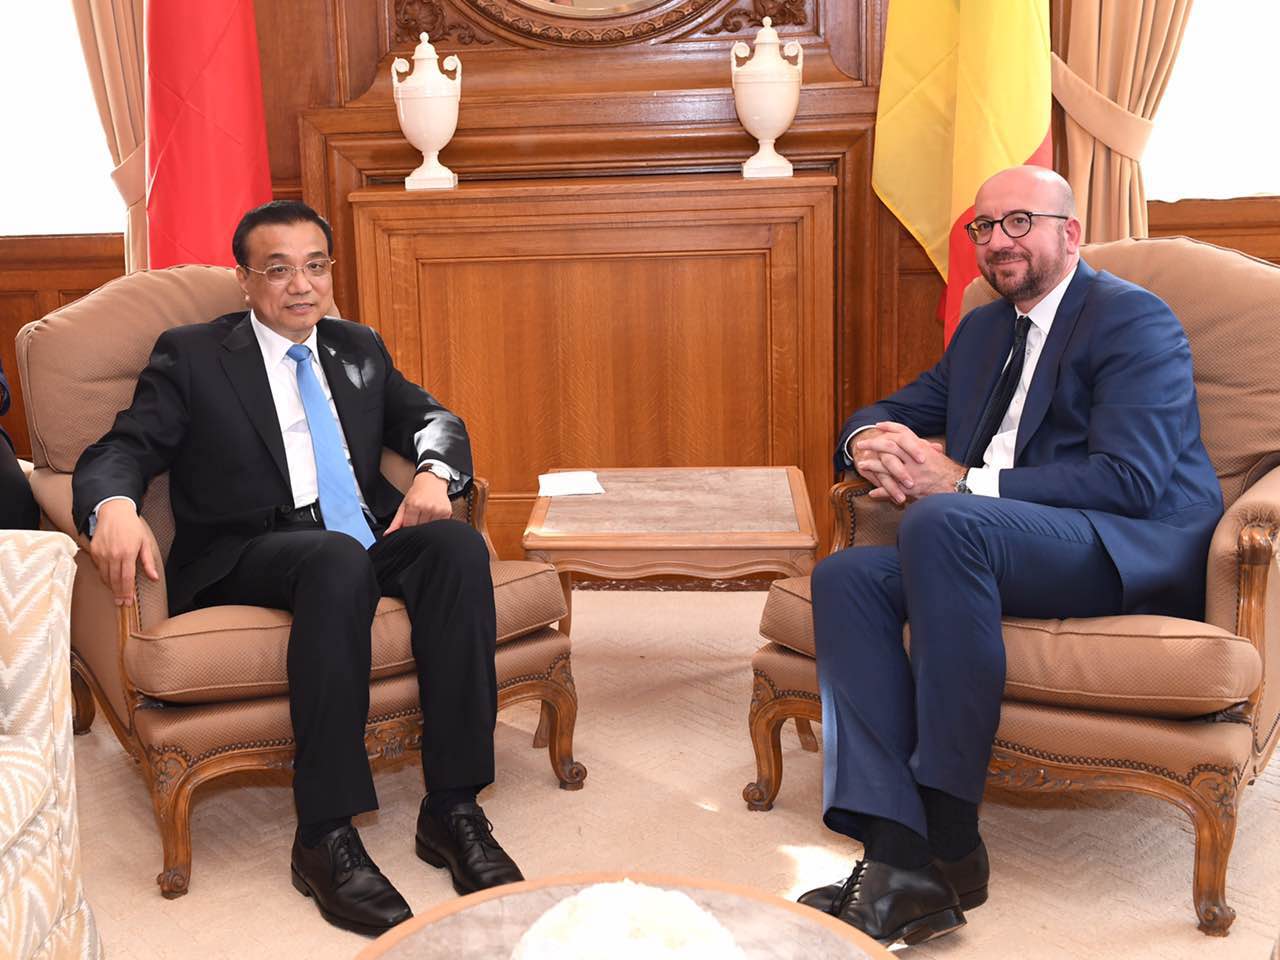 Chinese Premier Li Keqiang and Belgian Prime Minister Charles Michel hold talks and discuss various topics including bilateral ties, economic and trade cooperation as well as international affairs and regional issues of common concern, in Brussels, Belgium, on Friday, June 2, 2017. [Photo: gov.cn] 